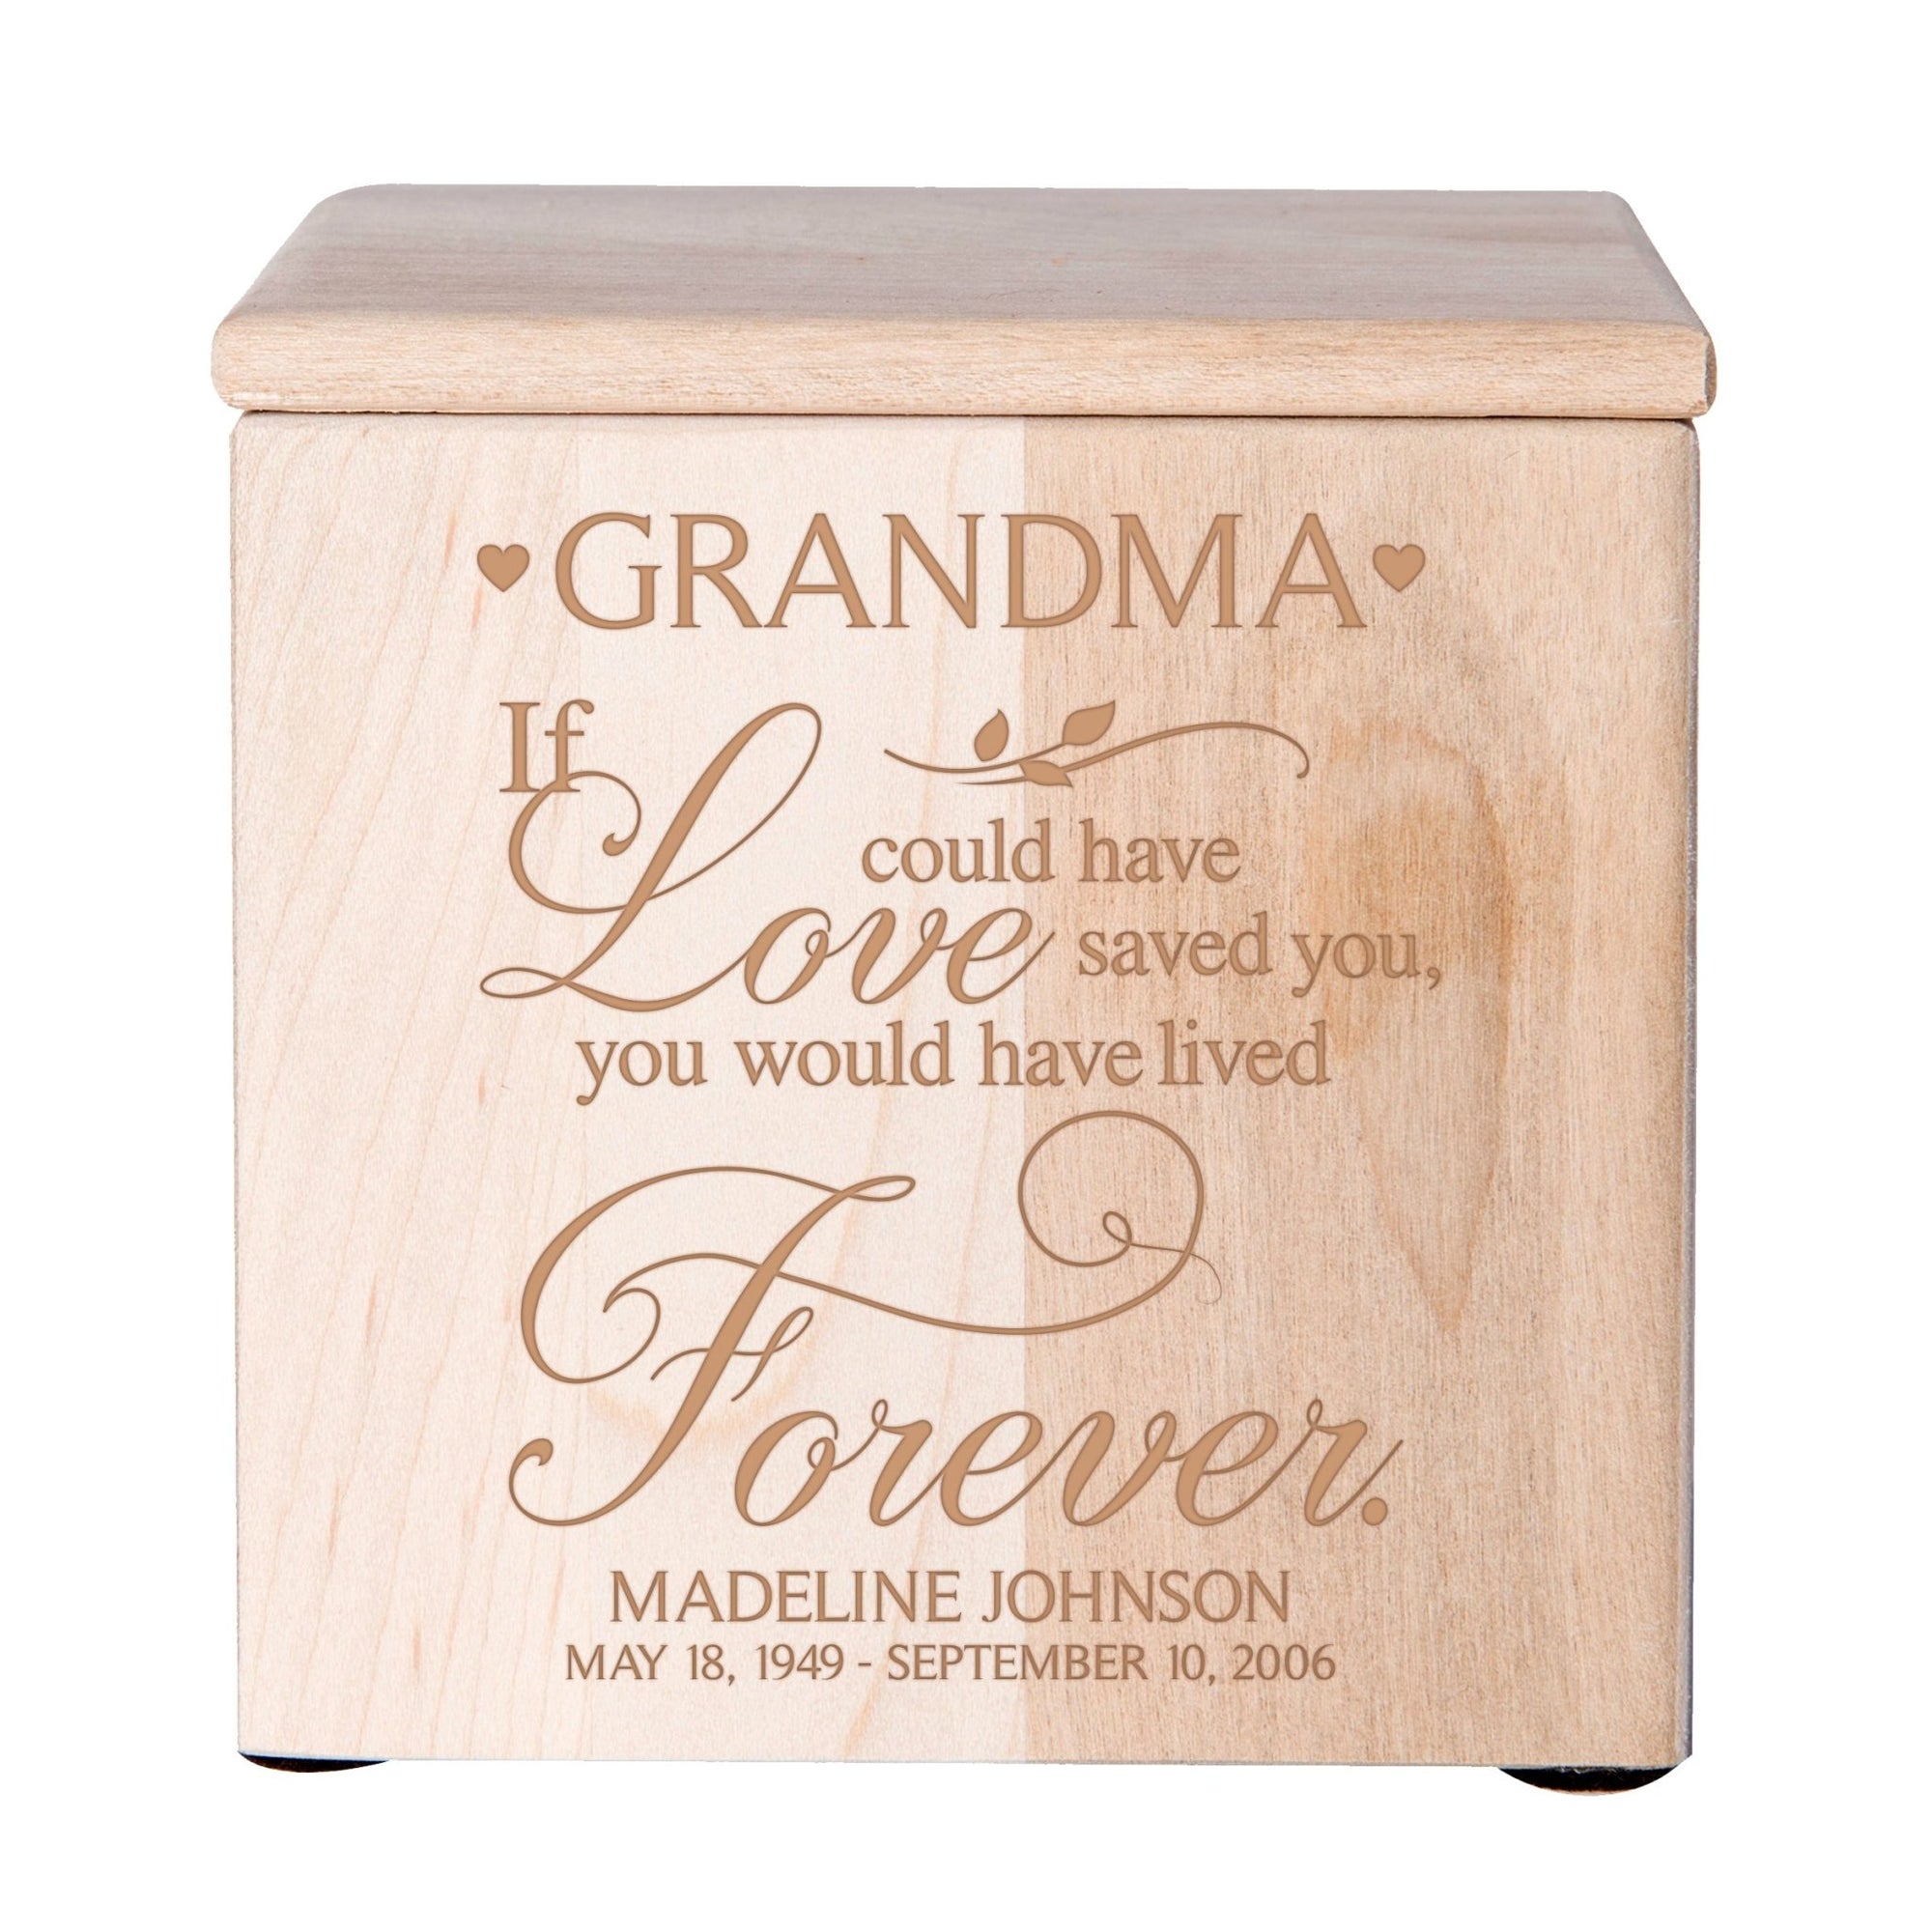 Custom Engraved Memorial Cremation Urn Box Holds 49 Cu Inches Of Human Ashes (If love could have saved Grandma) Funeral and Condolence Keepsake - LifeSong Milestones